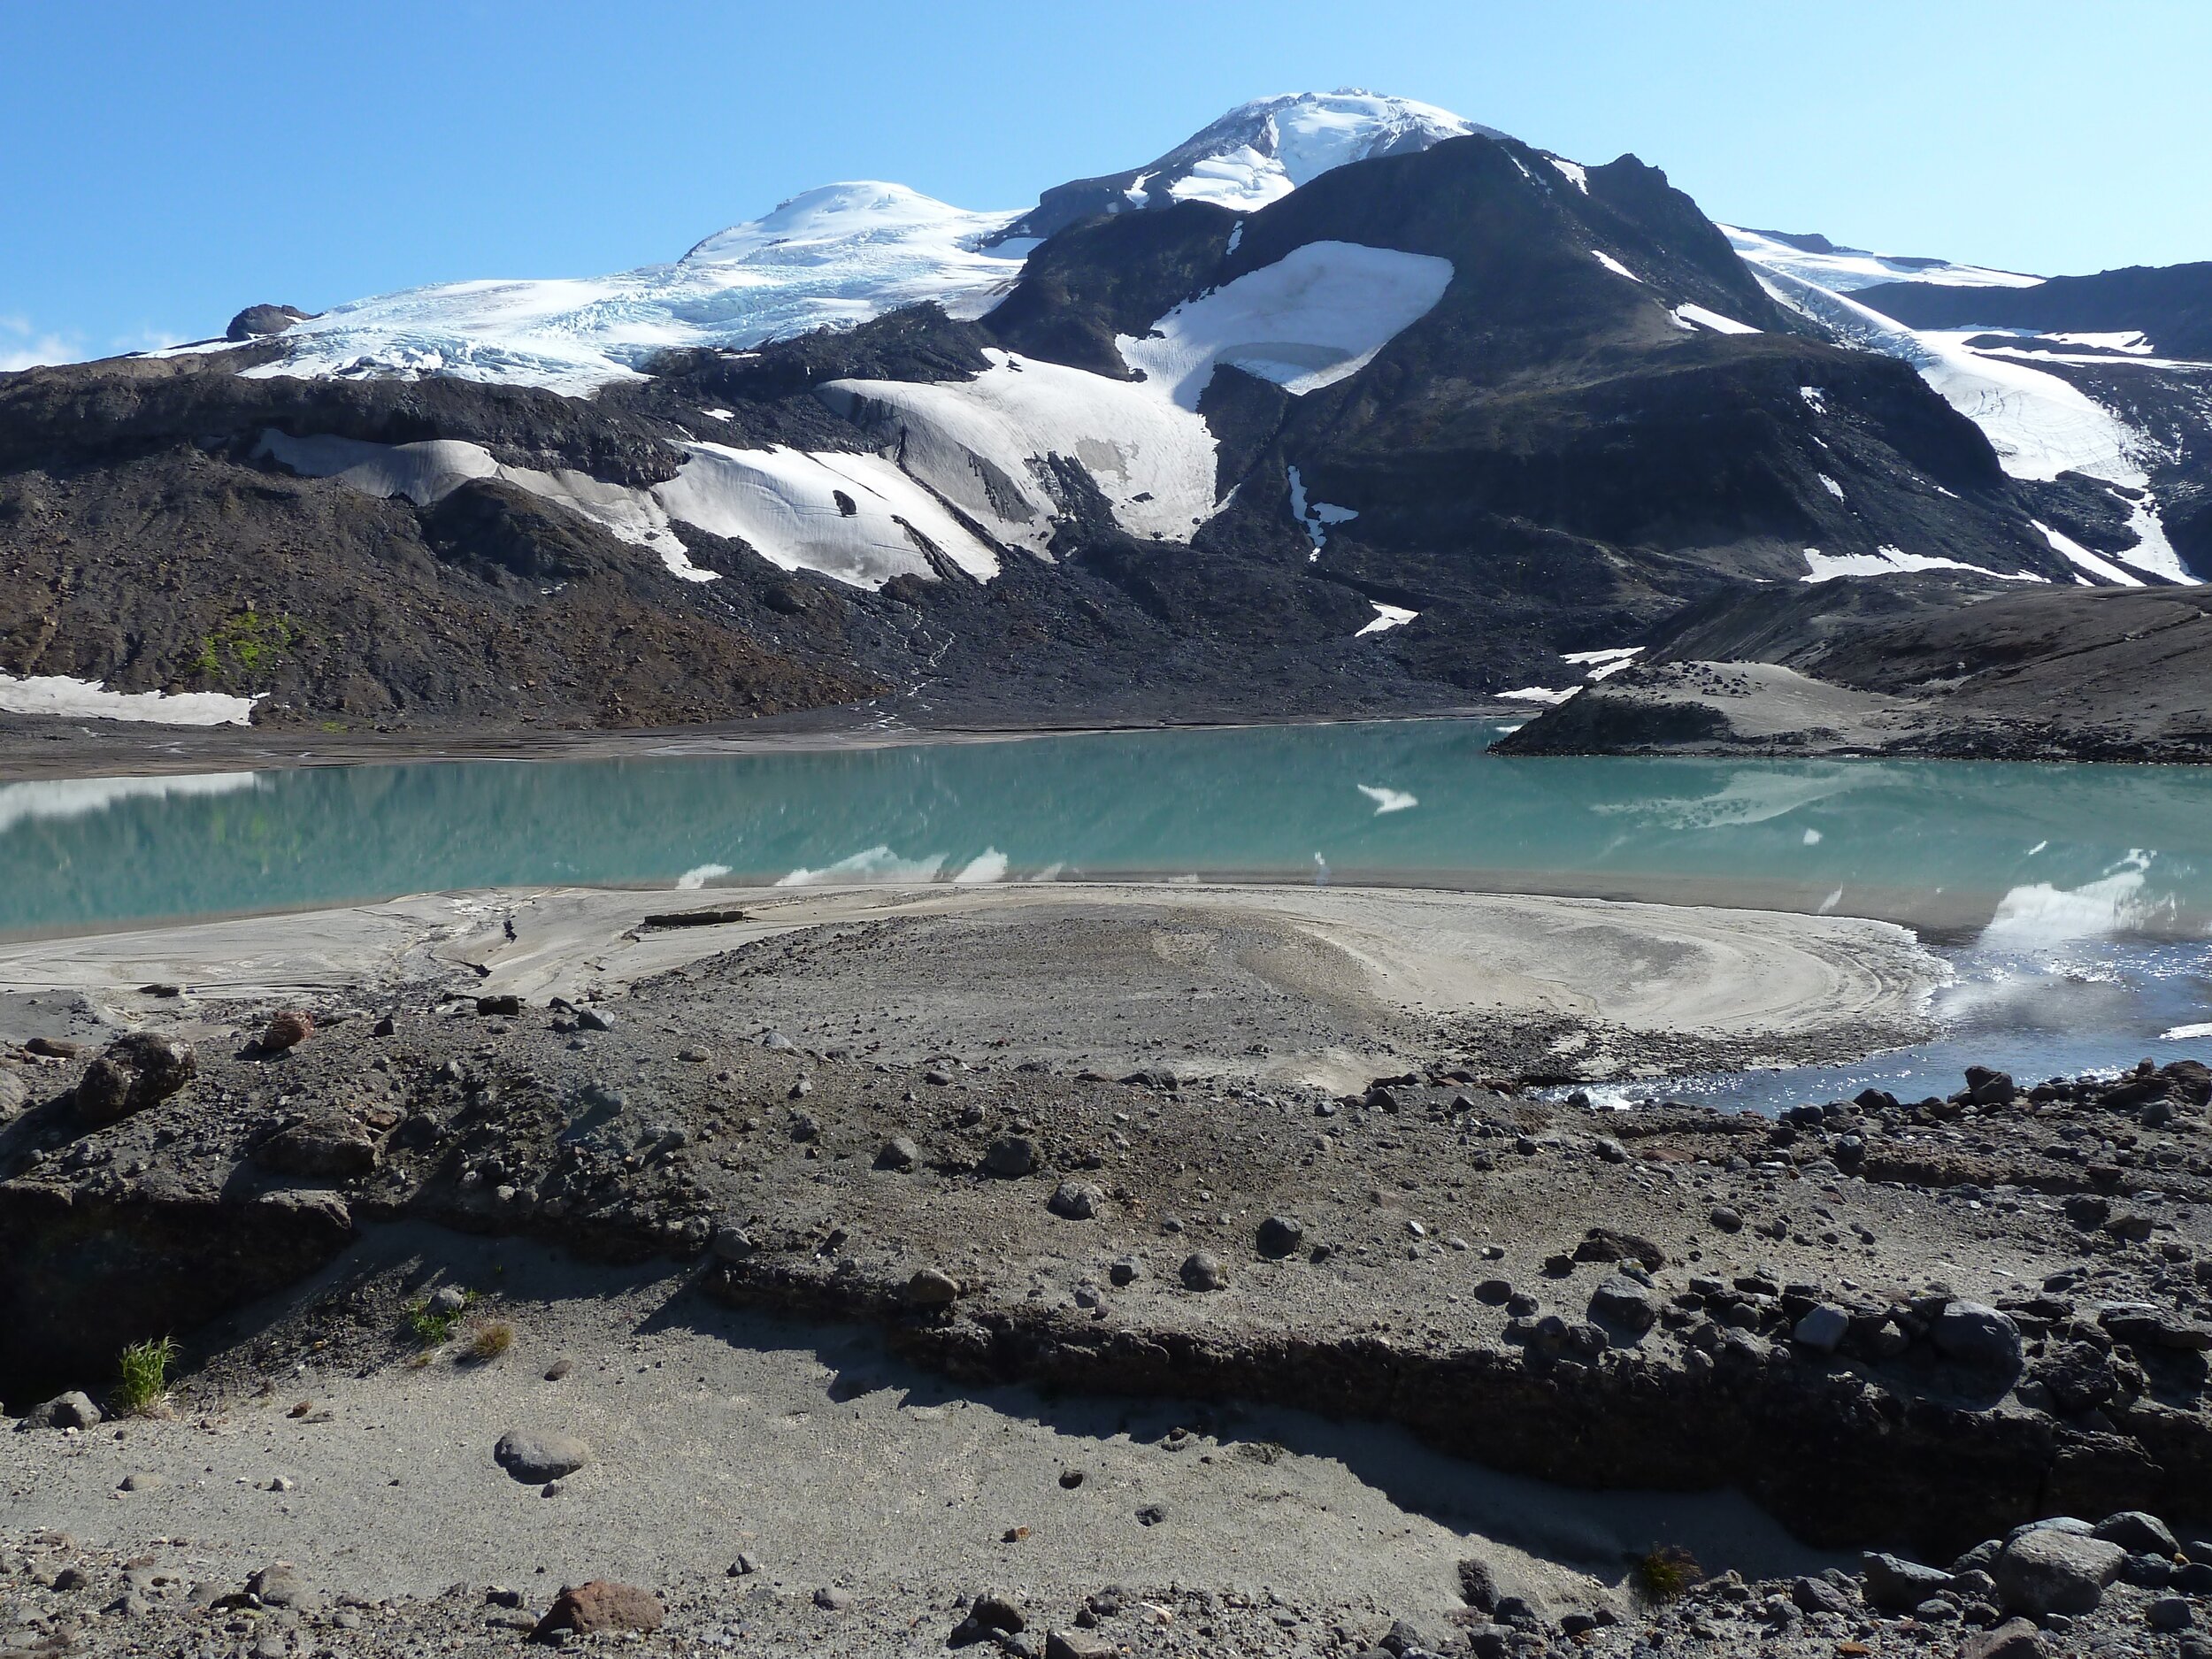 East Megeik Lake is located in a basin once occupied by a glacier.